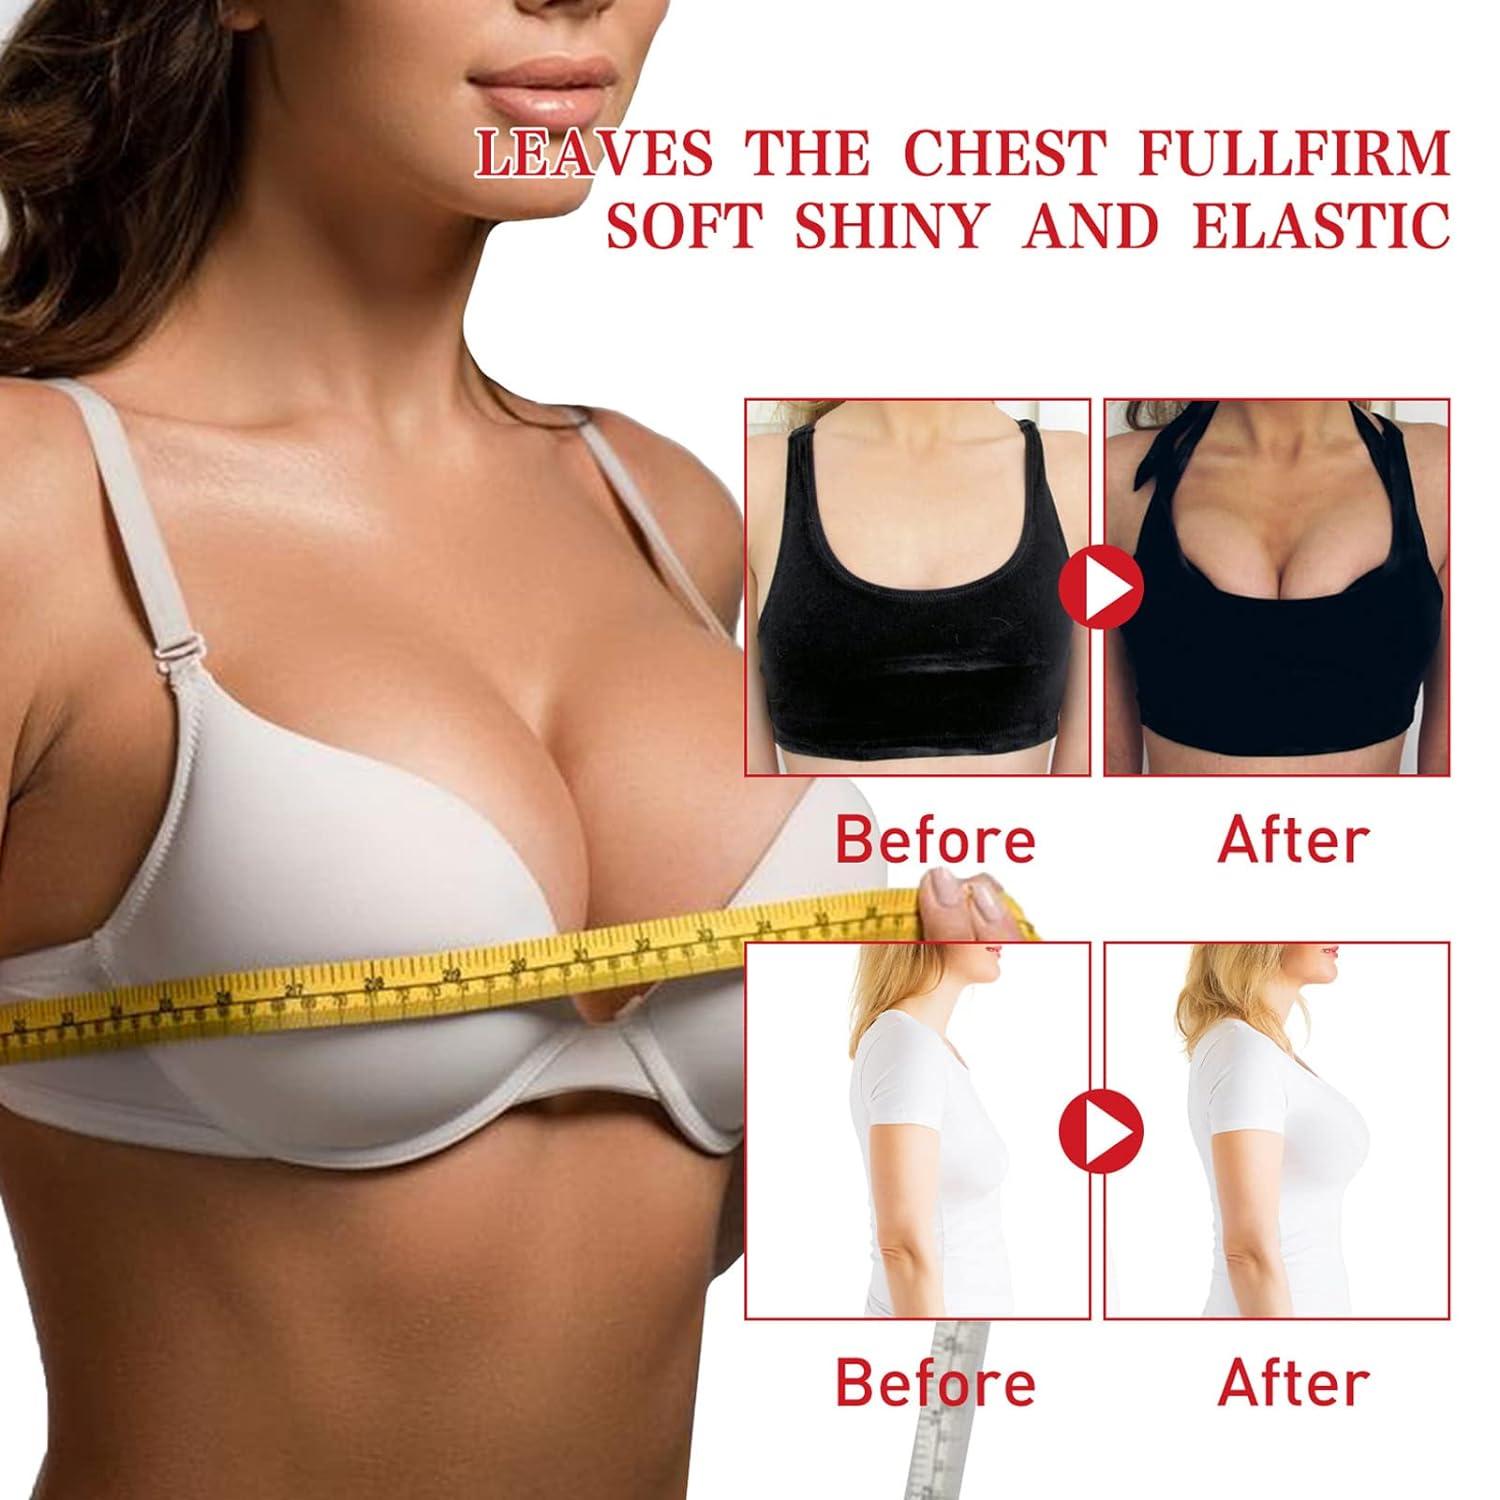 EASY exercises to reduce breast sizes QUICK, lift your bust, firm